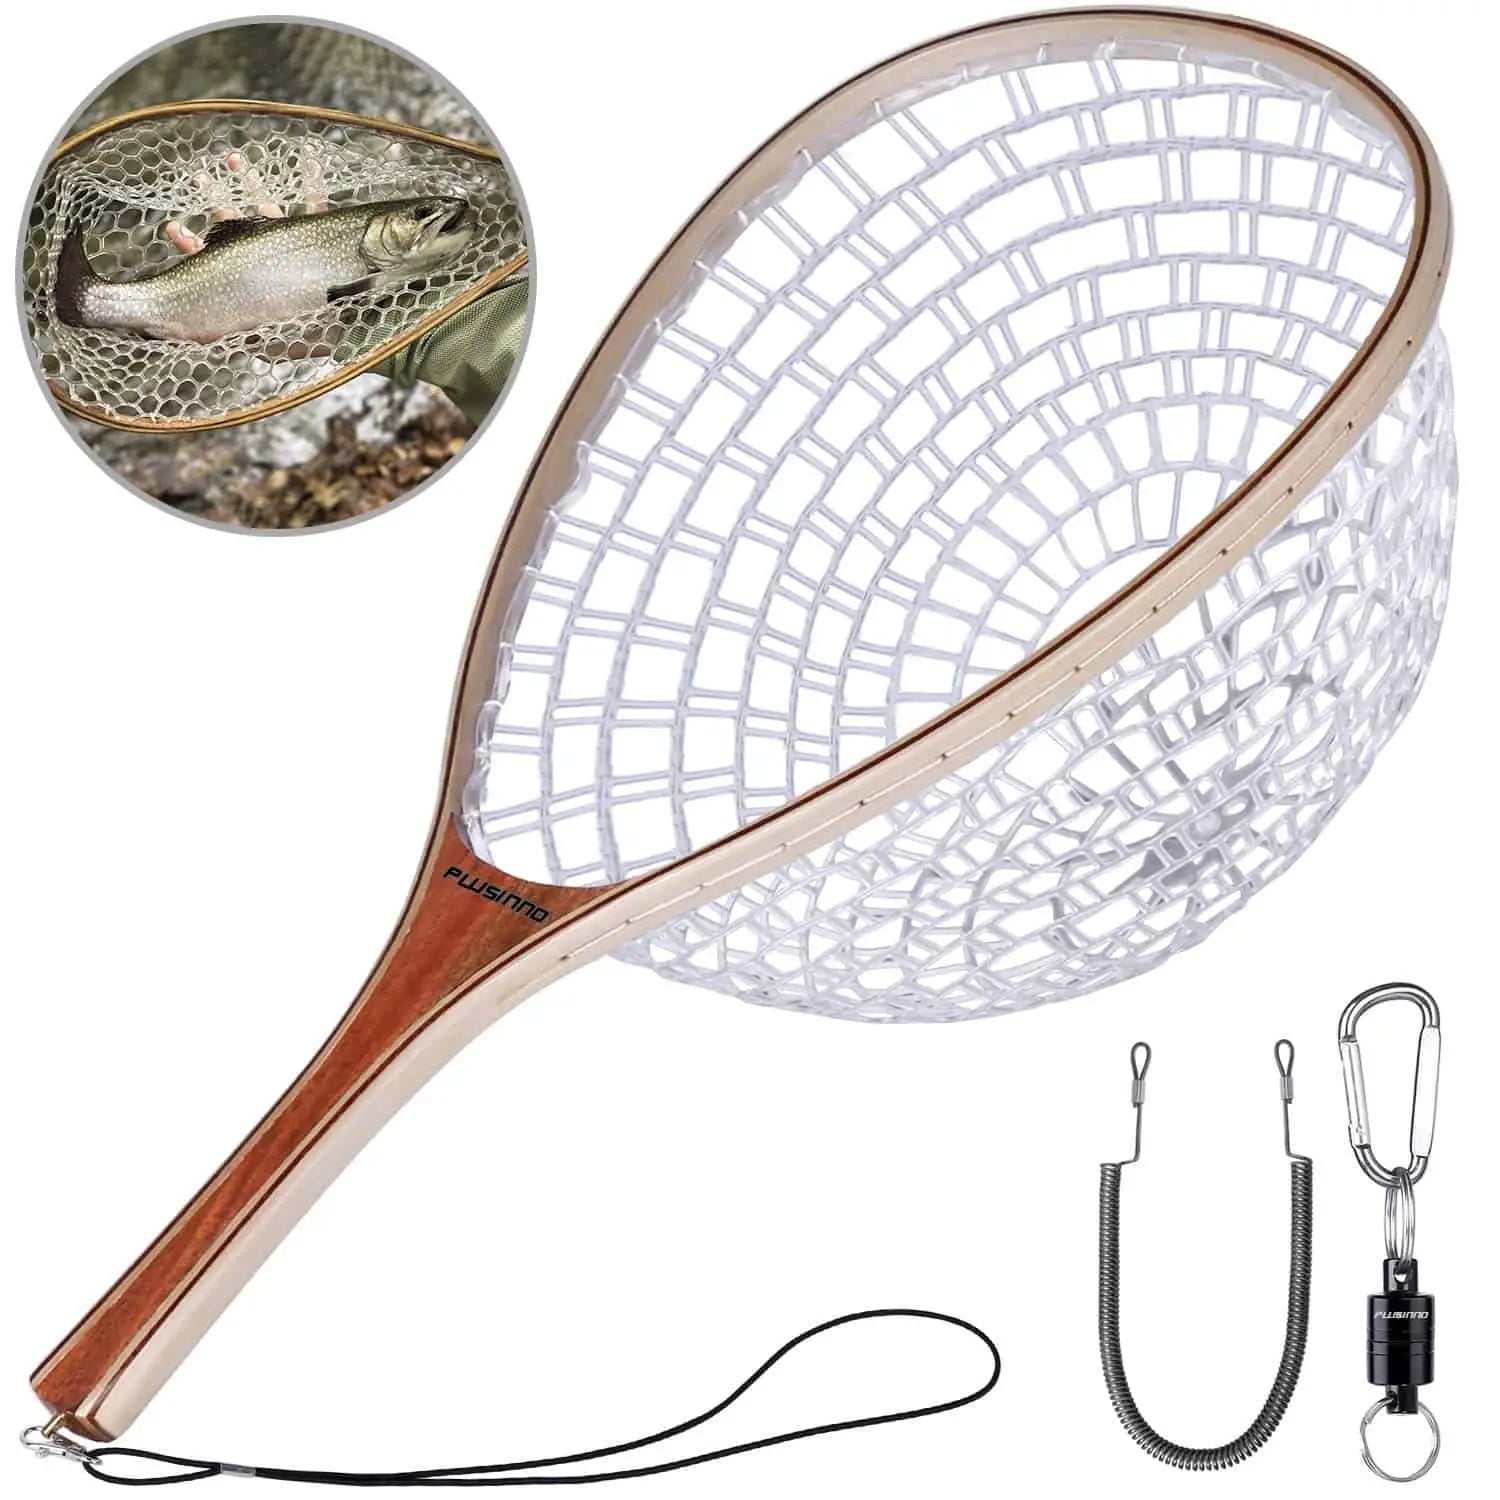 Cast Net 101: Choosing the Perfect Diameter for Any Skill Level – Plusinno